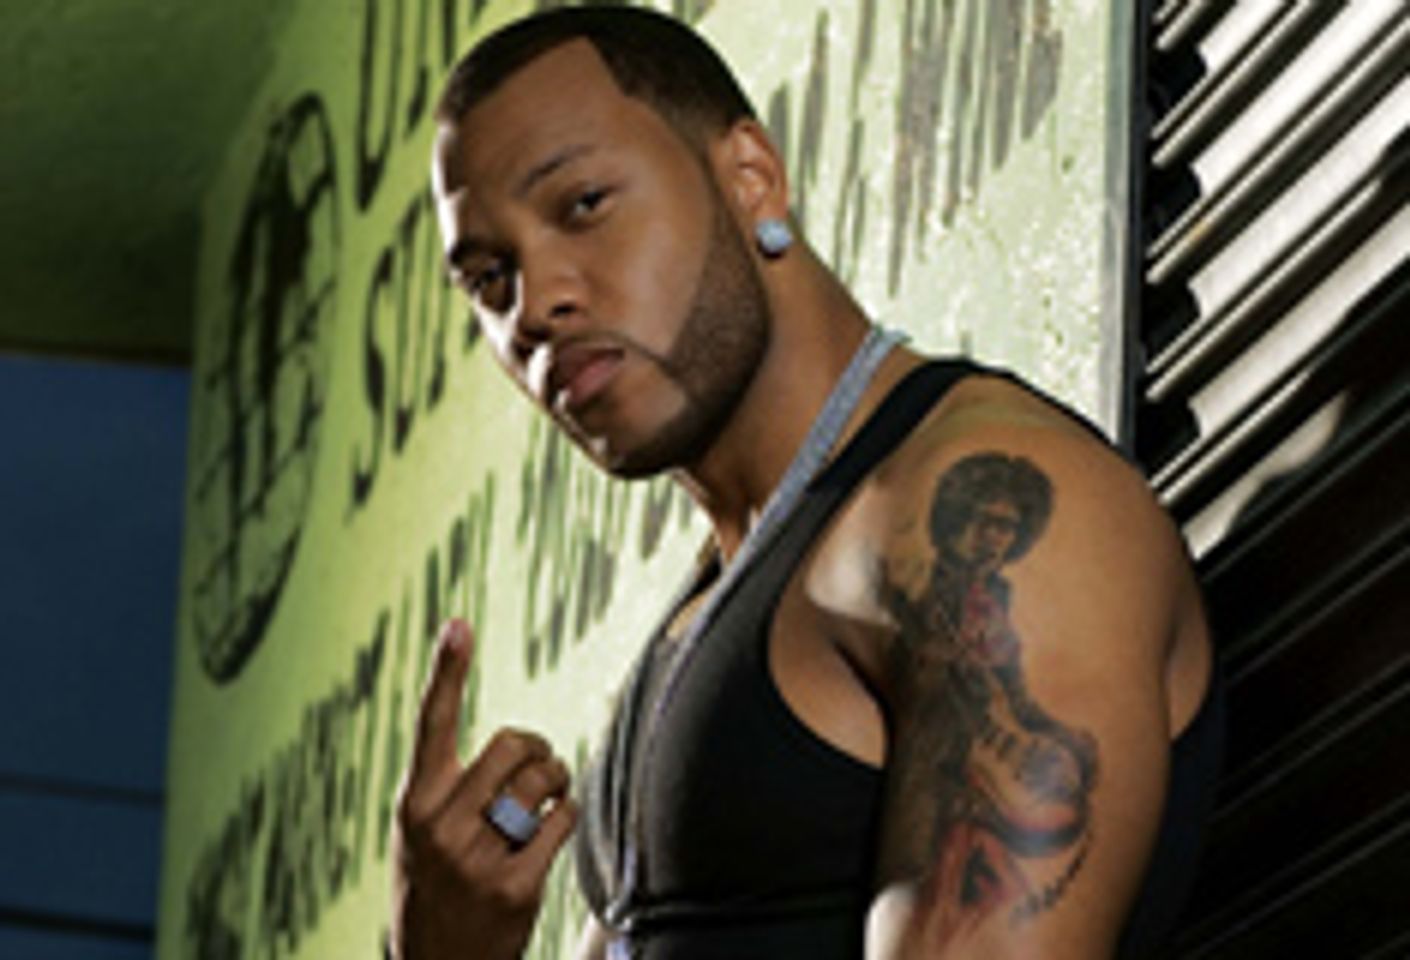 Flo Rida The Latest on Talented List of AVN Awards Performers